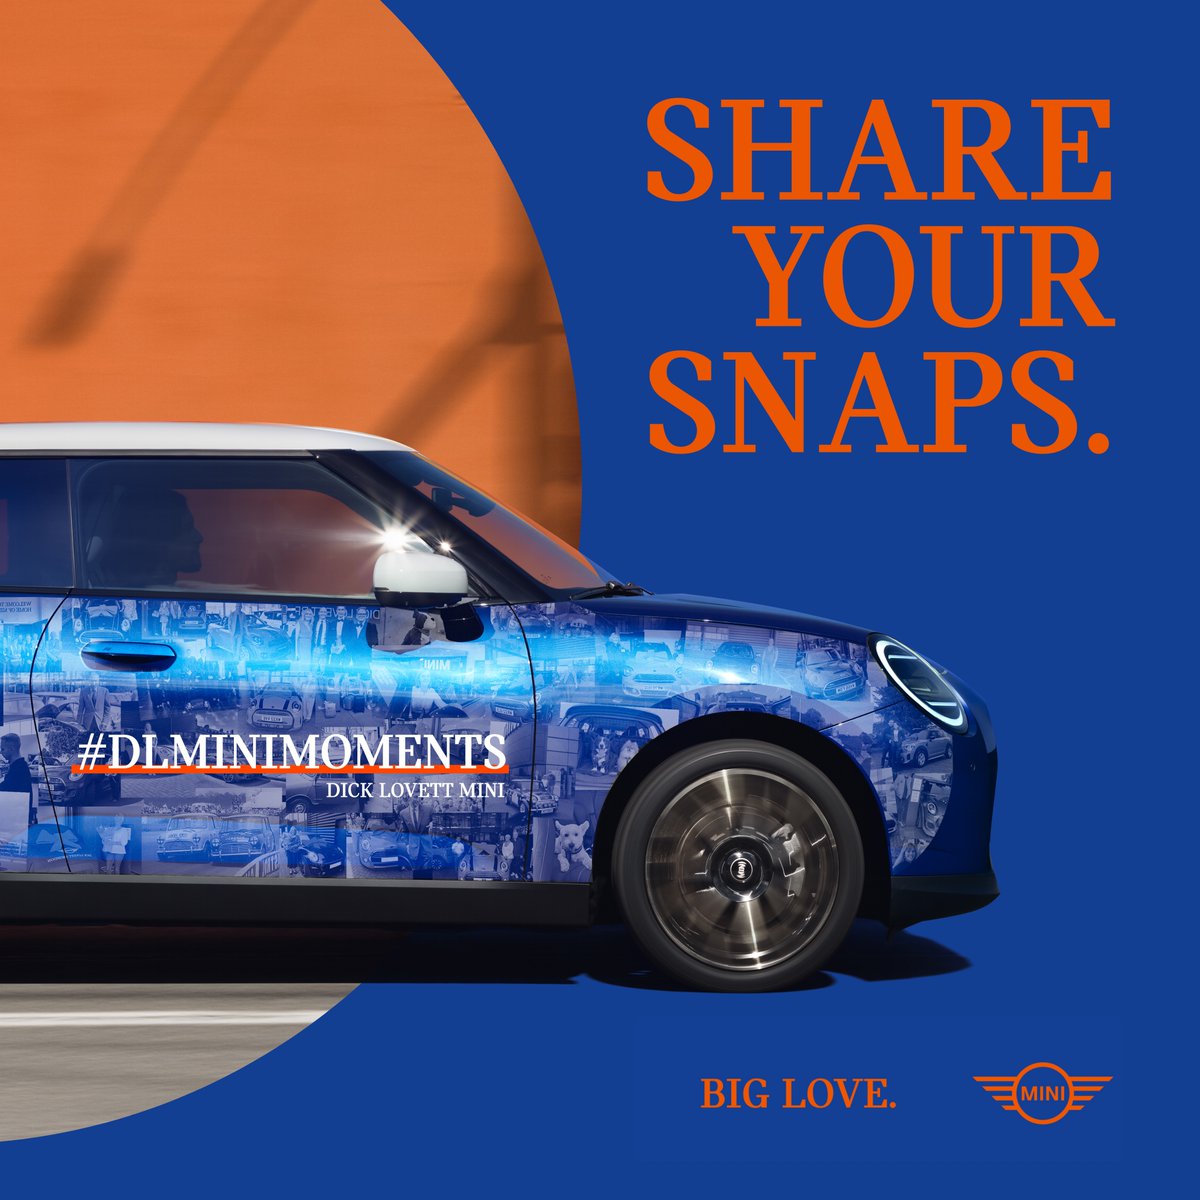 Calling all MINI owners! 📷 The new Cooper is on its way, and we want YOU to be a part of its unique design. Share your best MINI snaps with us for a chance to have your image featured on our demonstrators when they arrive! Simply comment below an image of your @MINI! @MINIUK